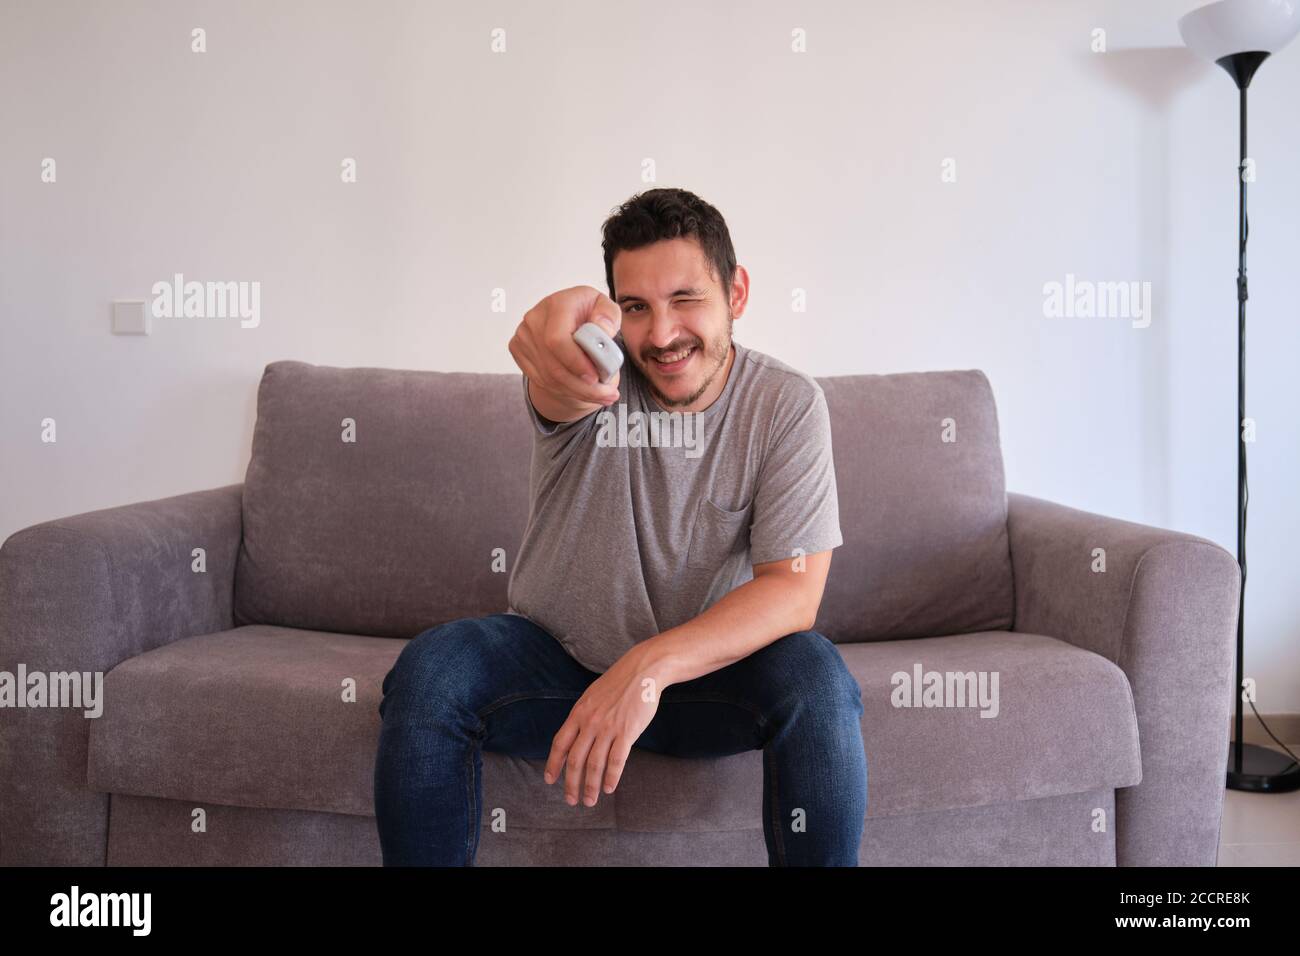 Portrait of a smiling young man sitting on a sofa and changing TV channels with the remote control on his hands. Stock Photo